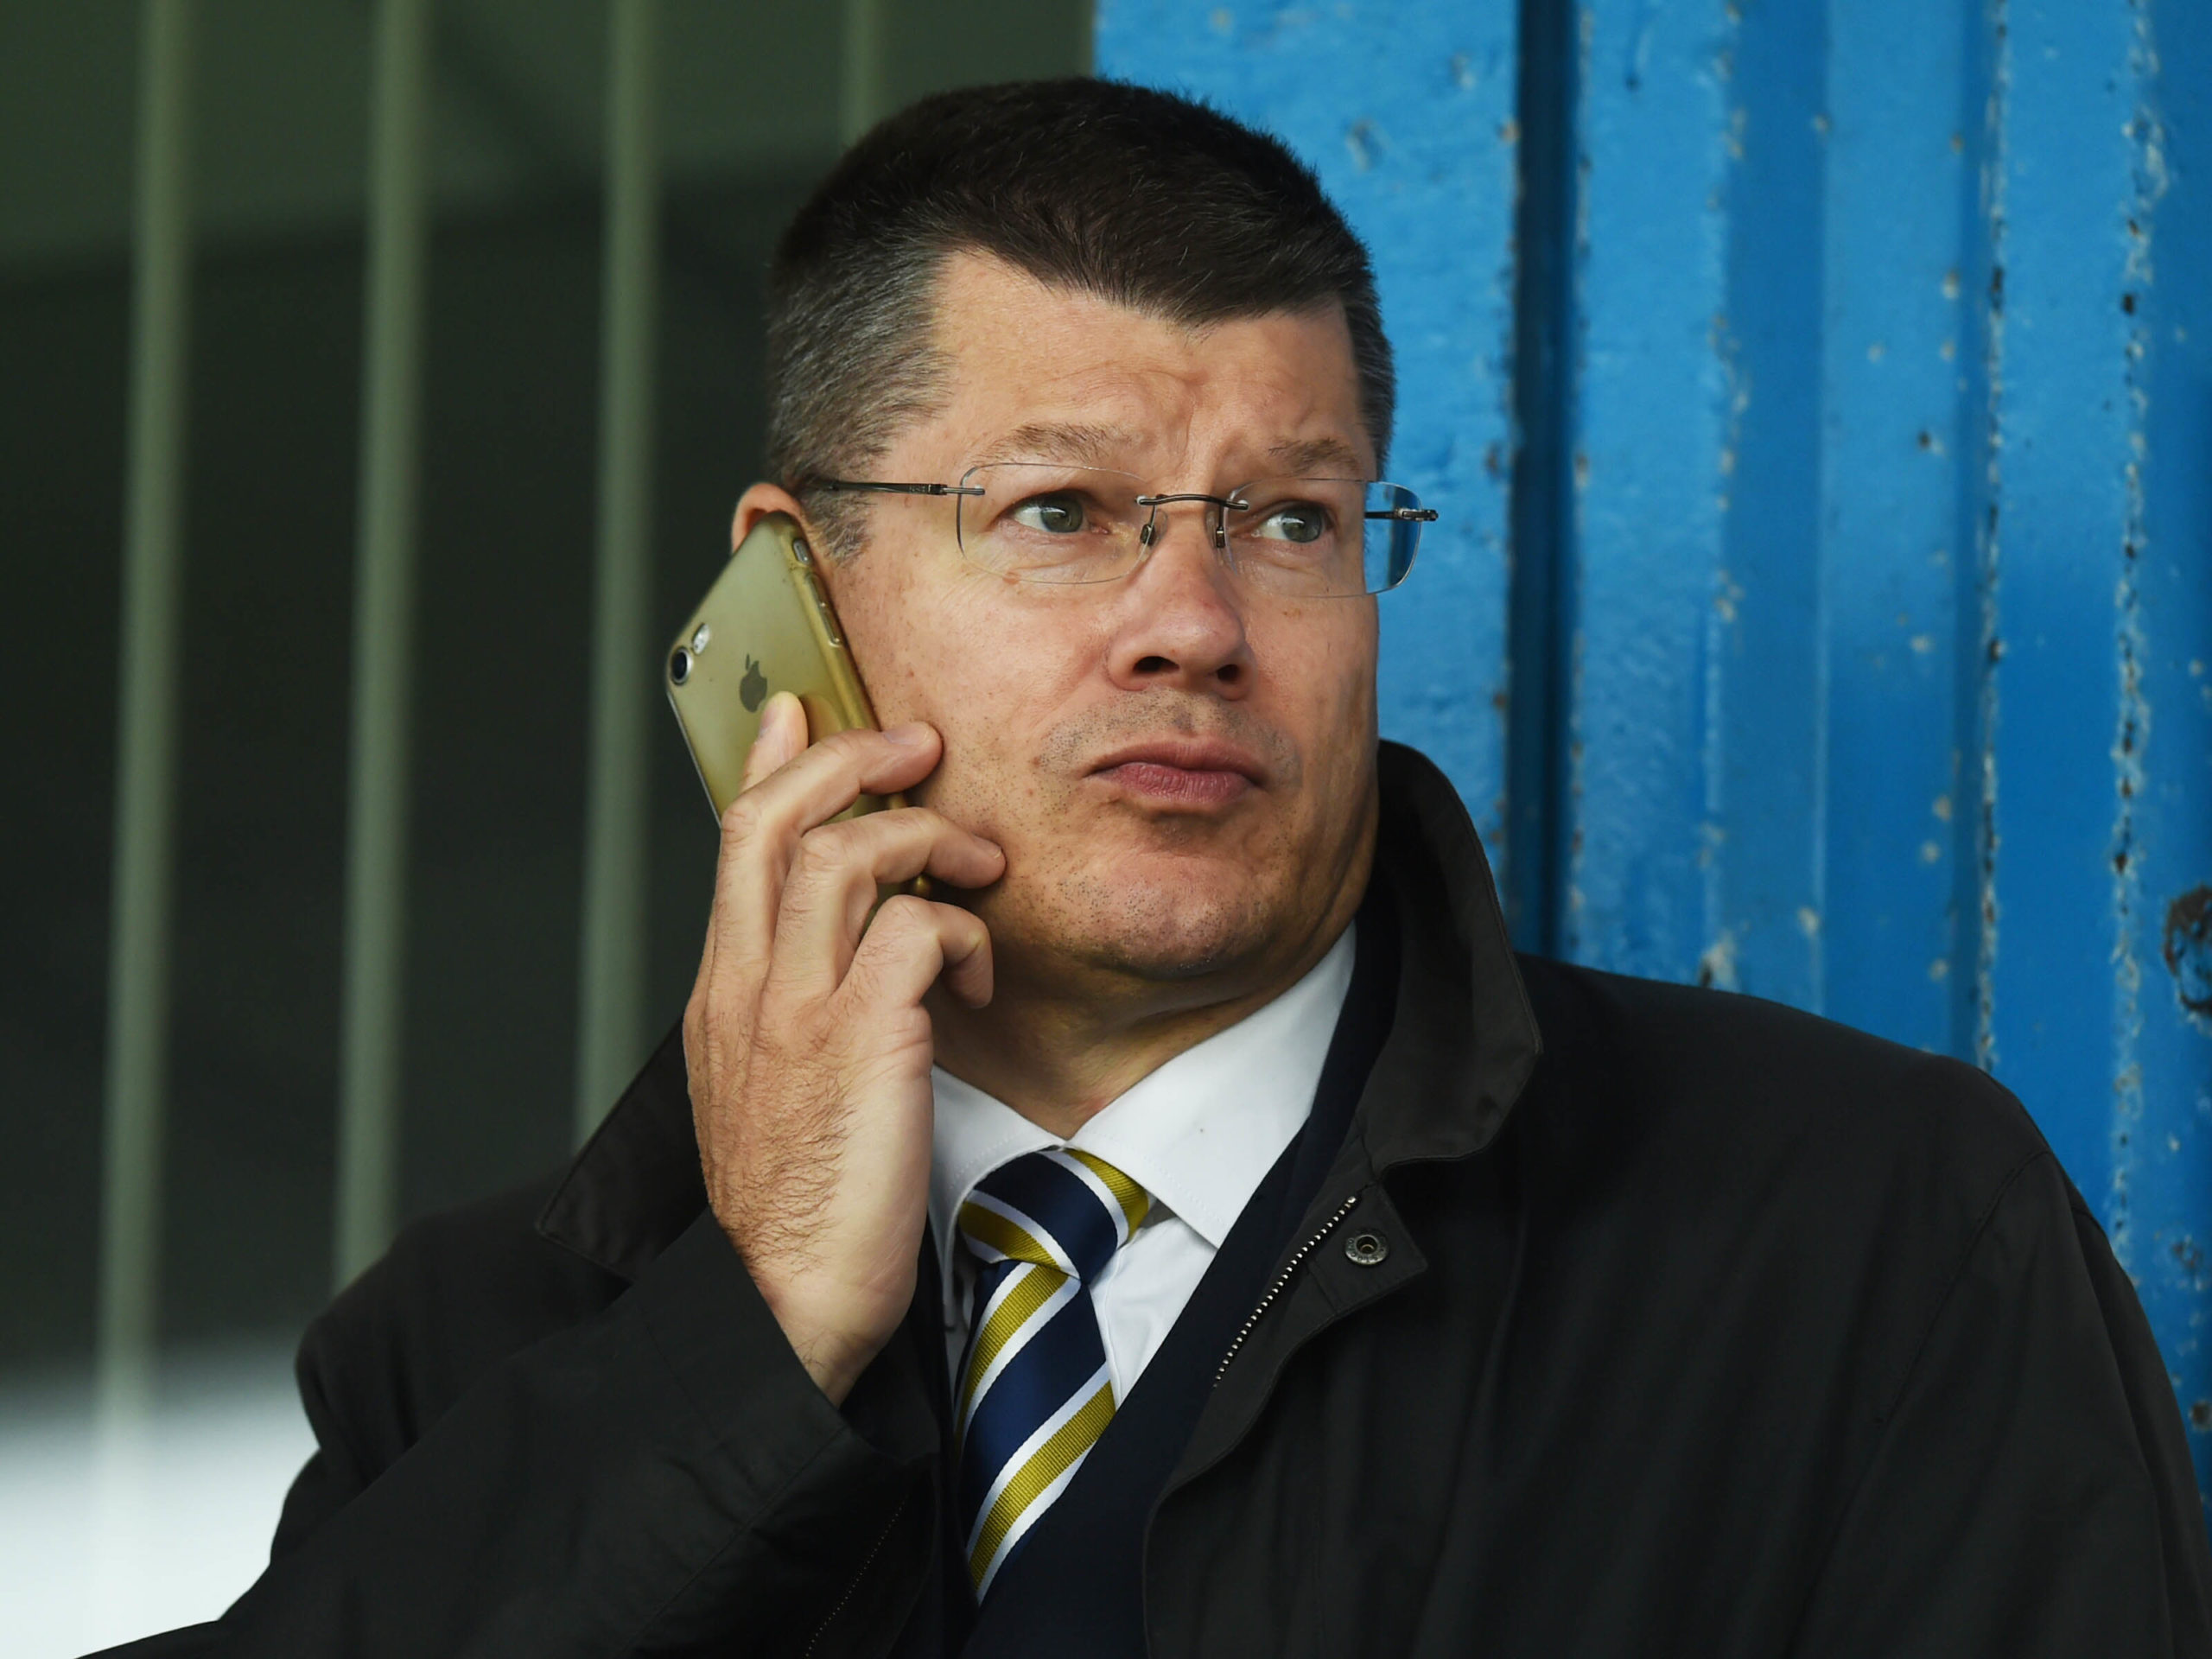 Neil Doncaster had his say in wake of today's developments